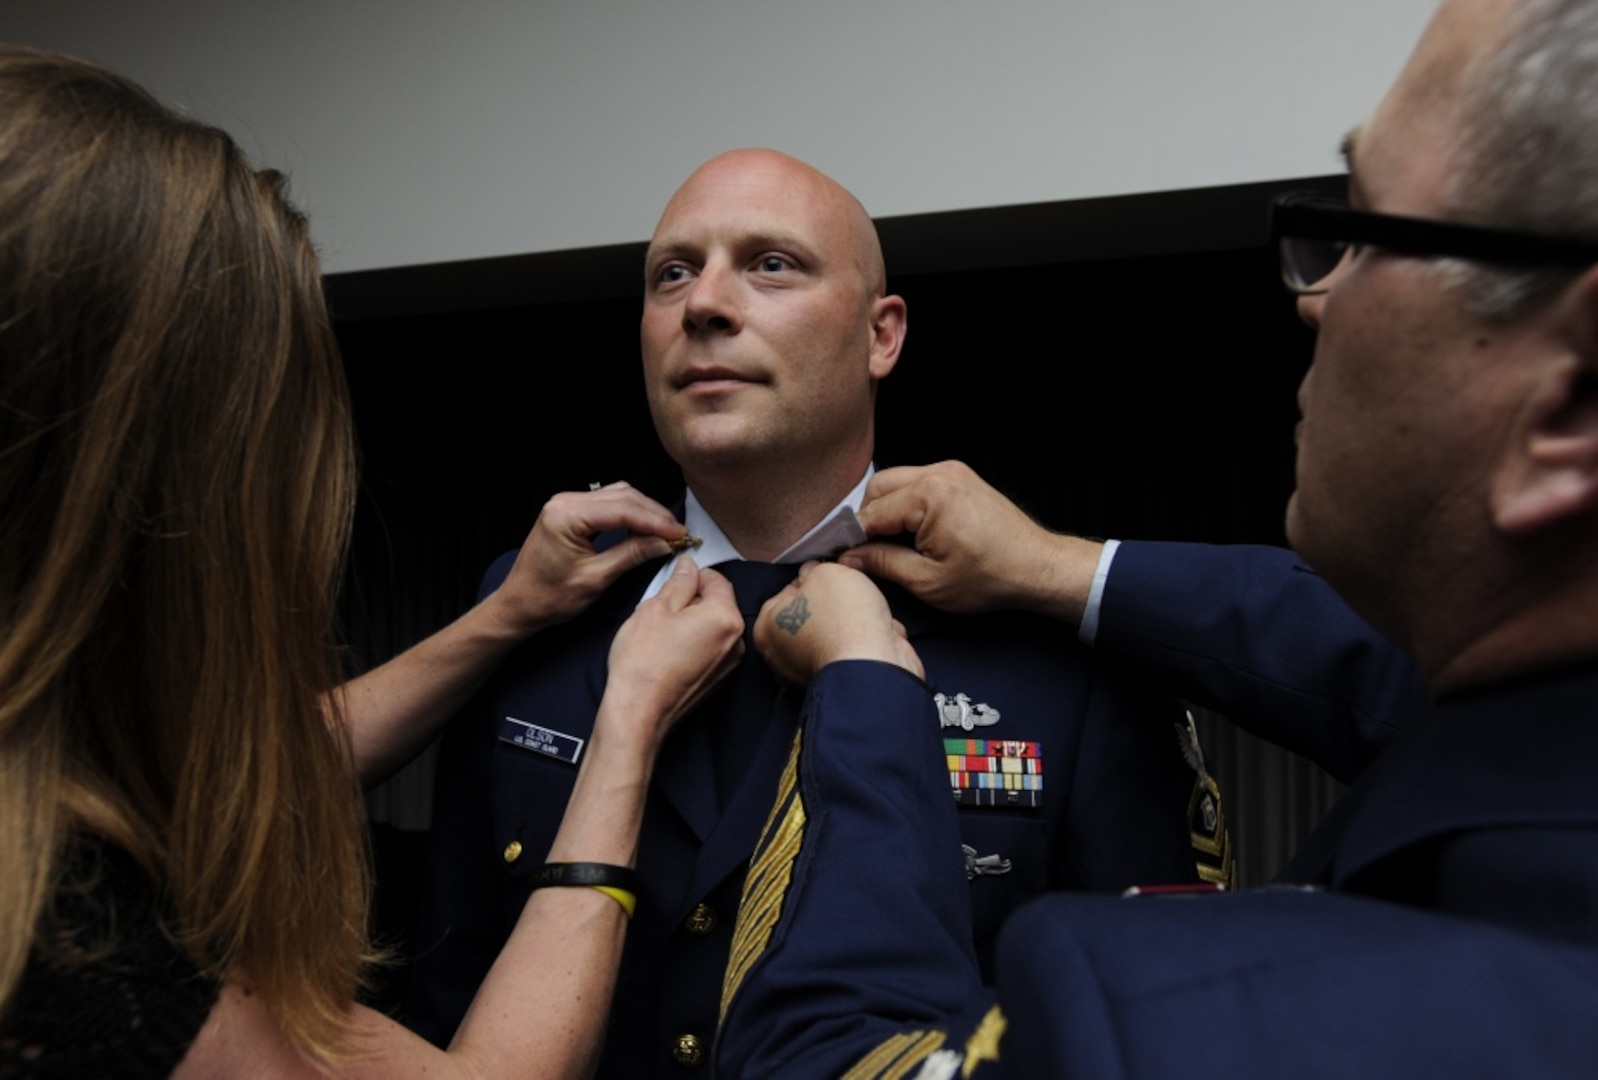 Cyndy Olson and Master Chief Petty Officer of the Coast Guard Steven Cantrell affix new collar devices to Ryan Olson's uniform during the 2014 Coast Guard Enlisted Persons of the Year Banquet at Joint Base Anacostia-Bolling in Washington, D.C., May 7, 2015. During the ceremony, Olson was recognized as the Enlisted Person of the Year - Reserve Component, an honor that comes with a meritorious advancement - in Olson's case, an advancement from petty officer first class to chief petty officer. (U.S. Coast Guard photo by Chief Petty Officer Kyle Niemi)